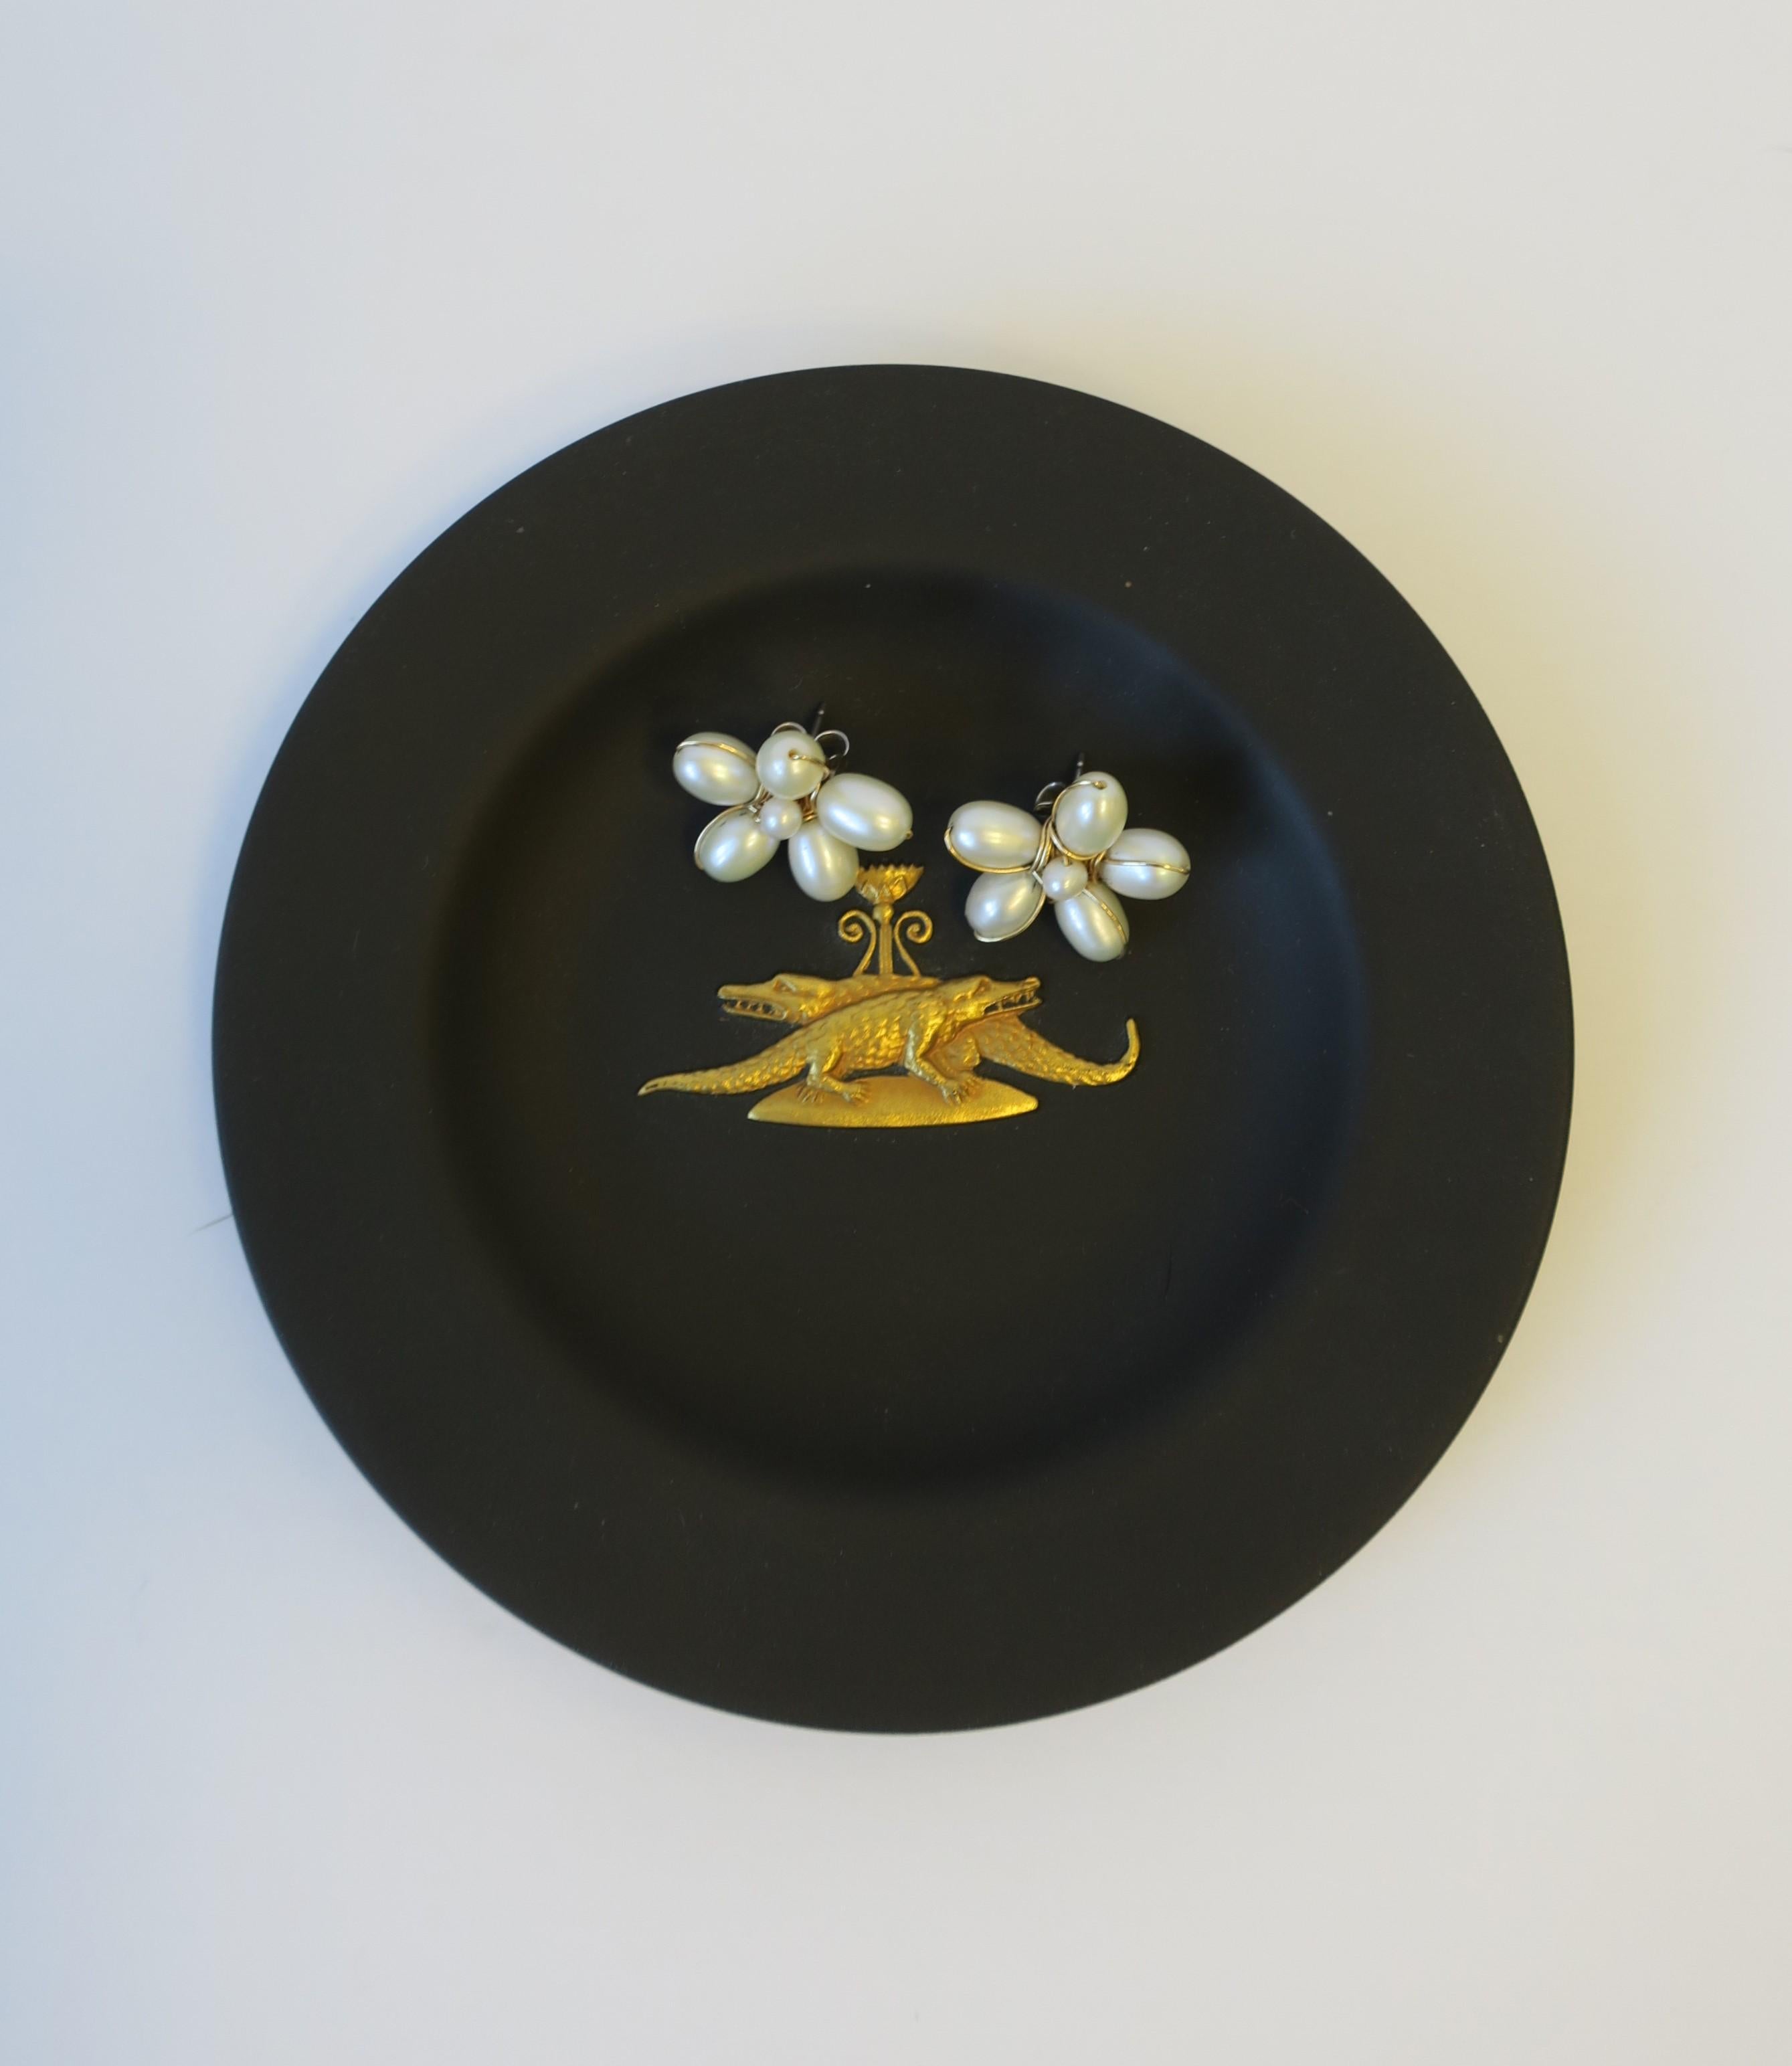 A chic and rare English Jasperware matte black basalt and gold dish by Wedgwood, England. A very beautiful small dish, with a gold raised relief of two alligators or crocodiles. Dish is beautiful as a standalone piece, or for small jewelry or other